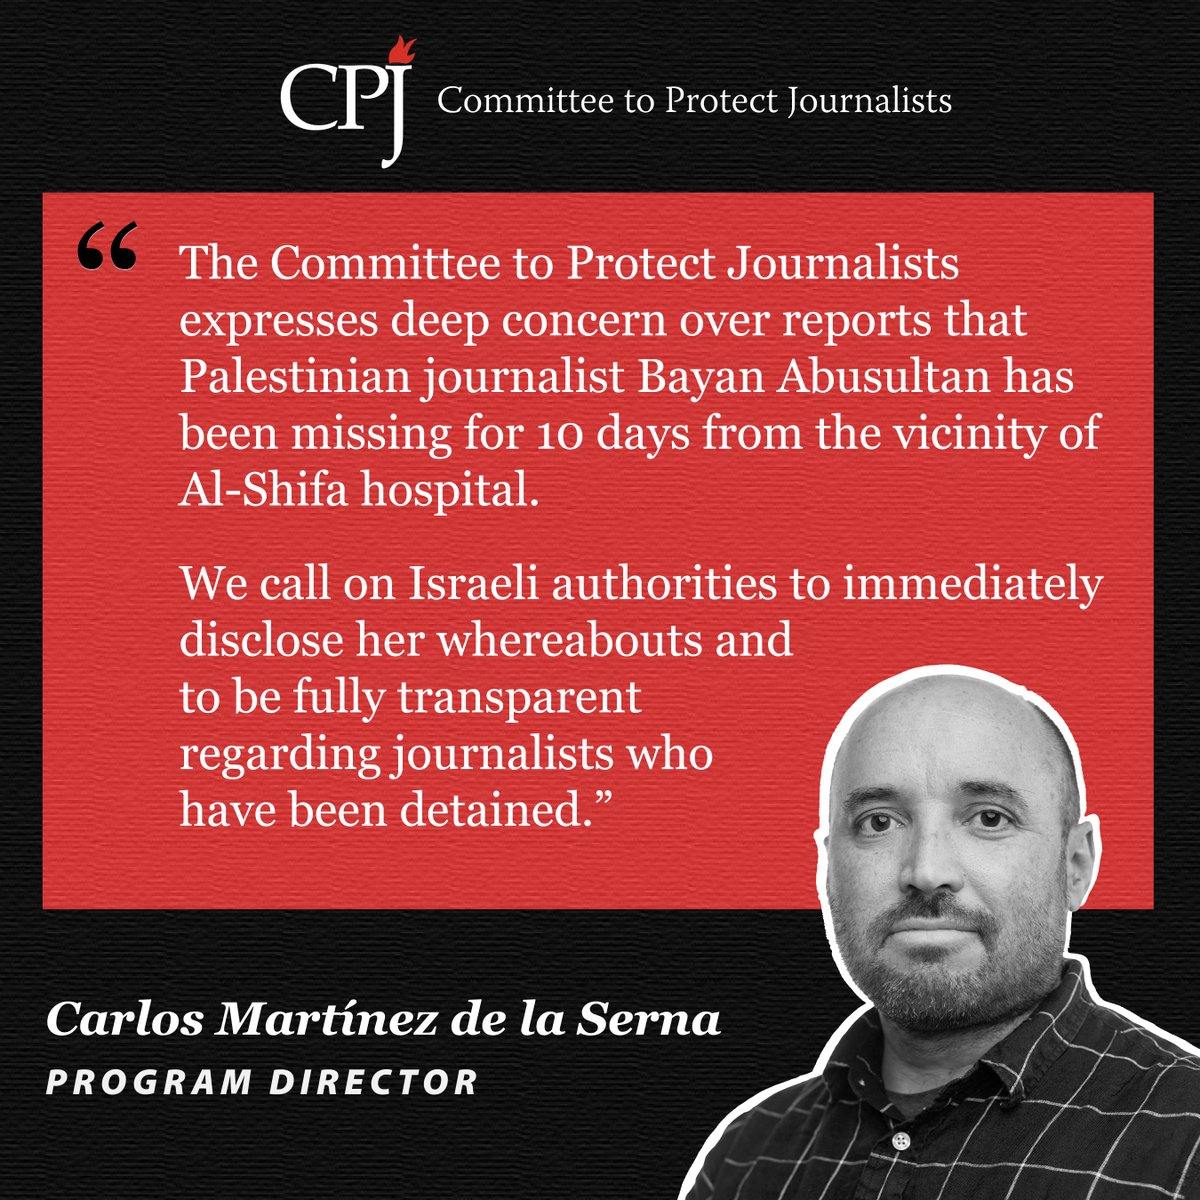 #Gaza: CPJ expresses deep concern over reports that Palestinian journalist #Bayan_Abusultan has been missing for 10 days from the vicinity of Al-Shifa hospital. We call on #Israeli authorities to immediately disclose her whereabouts.